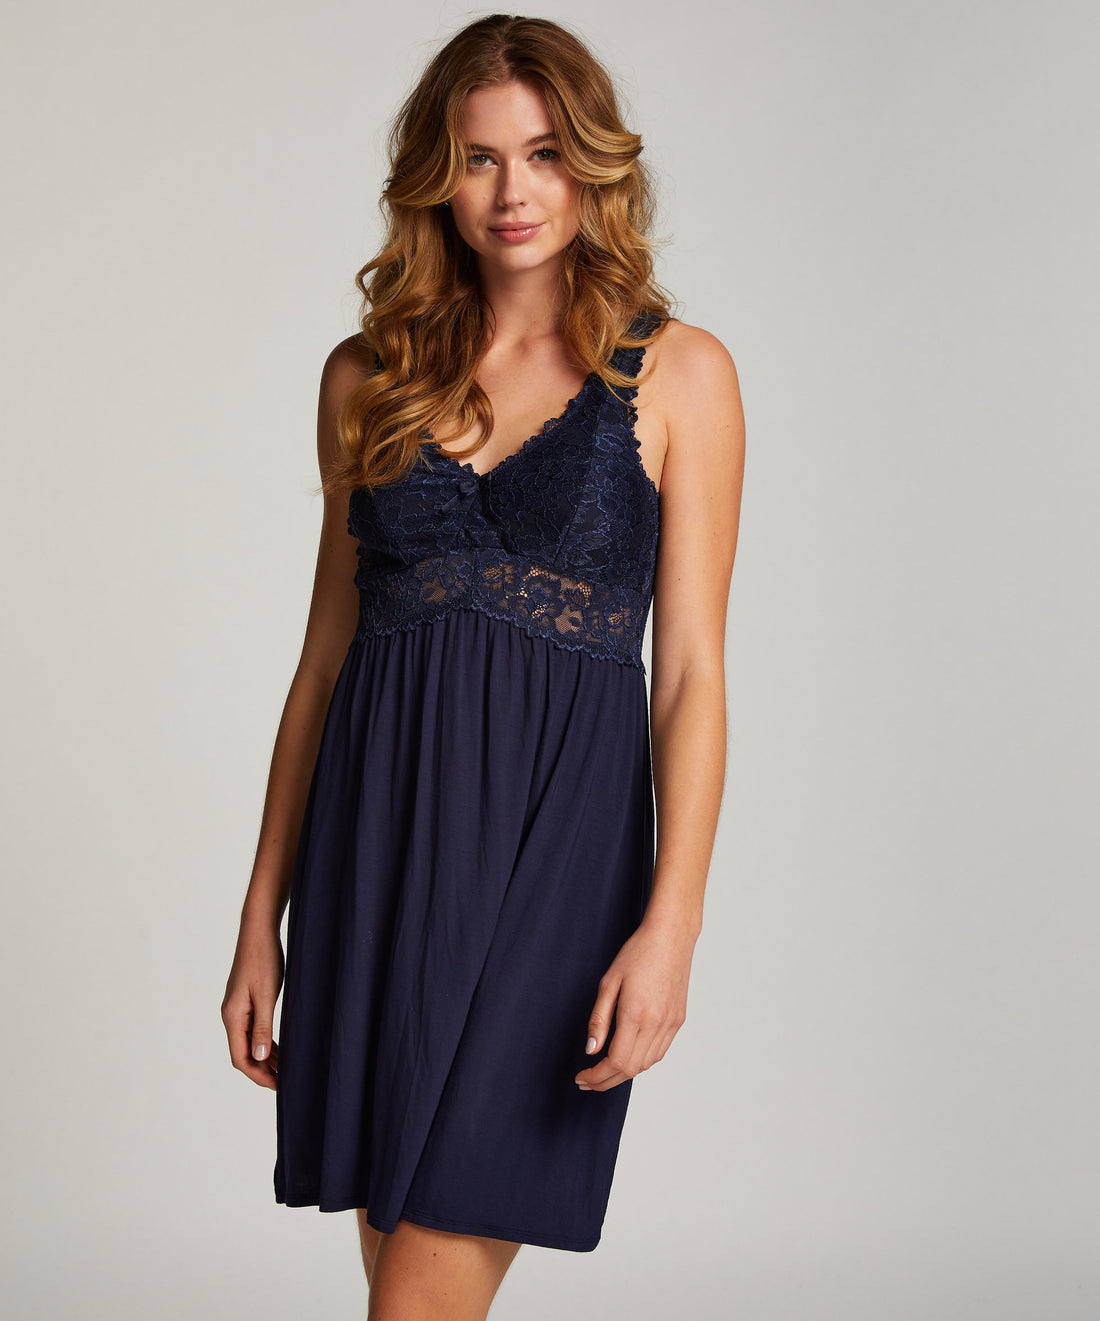 Nora Lace Nightgown_175239_Peacoat_01